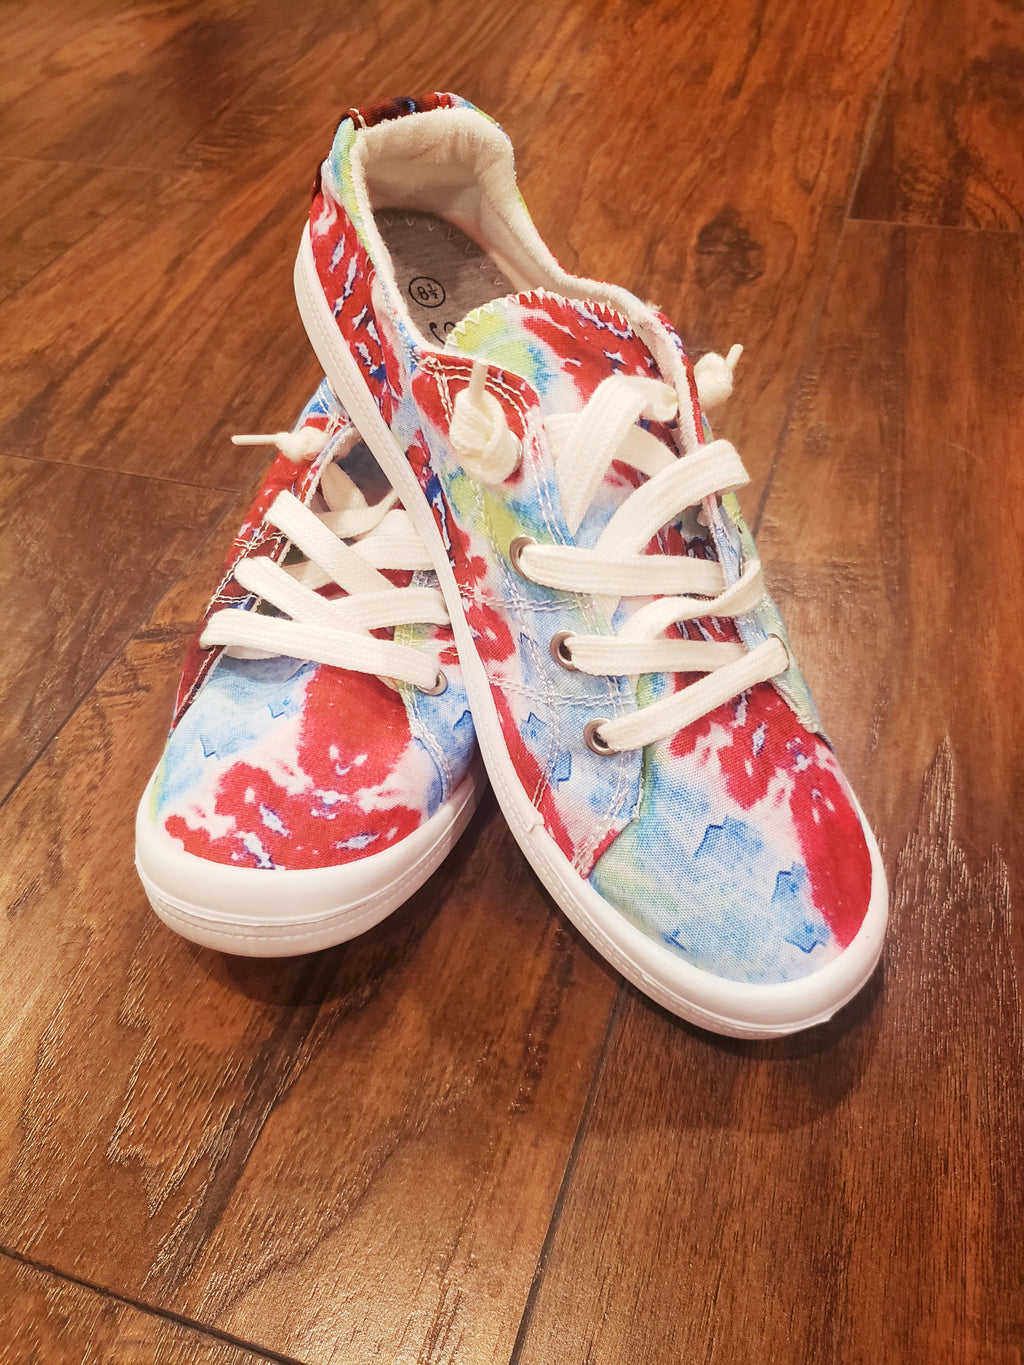 Tie dye shoes- red